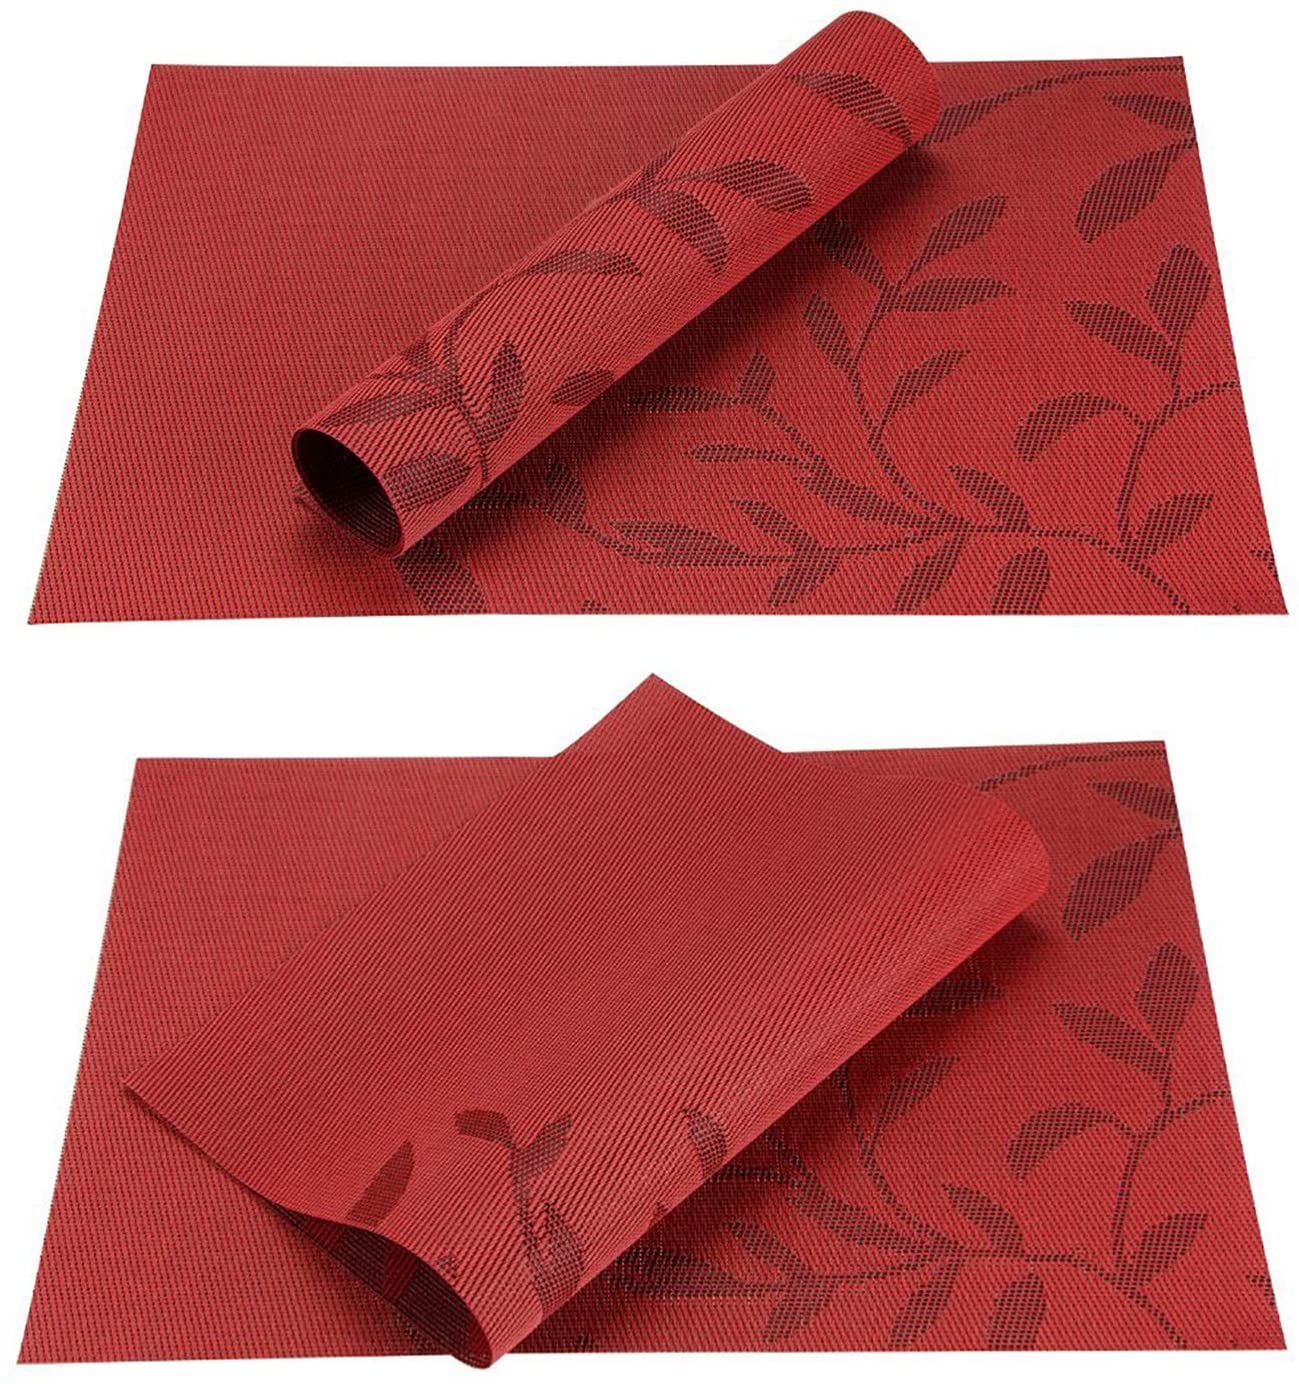 Dinning Table Placemats for Kitchen Table Set of 8 Vinyl Woven Place Mats Heat Resistant Wipeable Placemat for Holiday